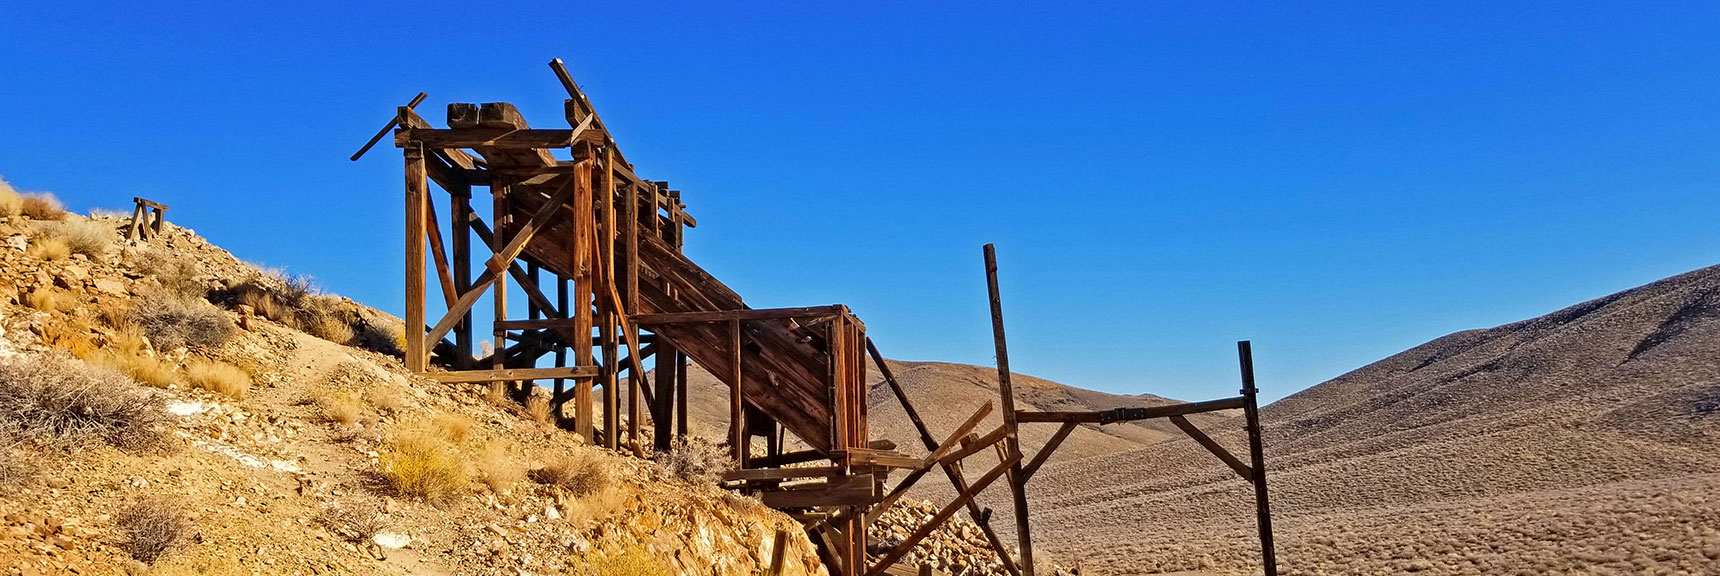 Side View of Cashier Mill. 8750 Ounces of Gold Extracted Worth $175,000 At the Time | Eureka Mine, Harrisburg, Cashier Mill, Death Valley, California